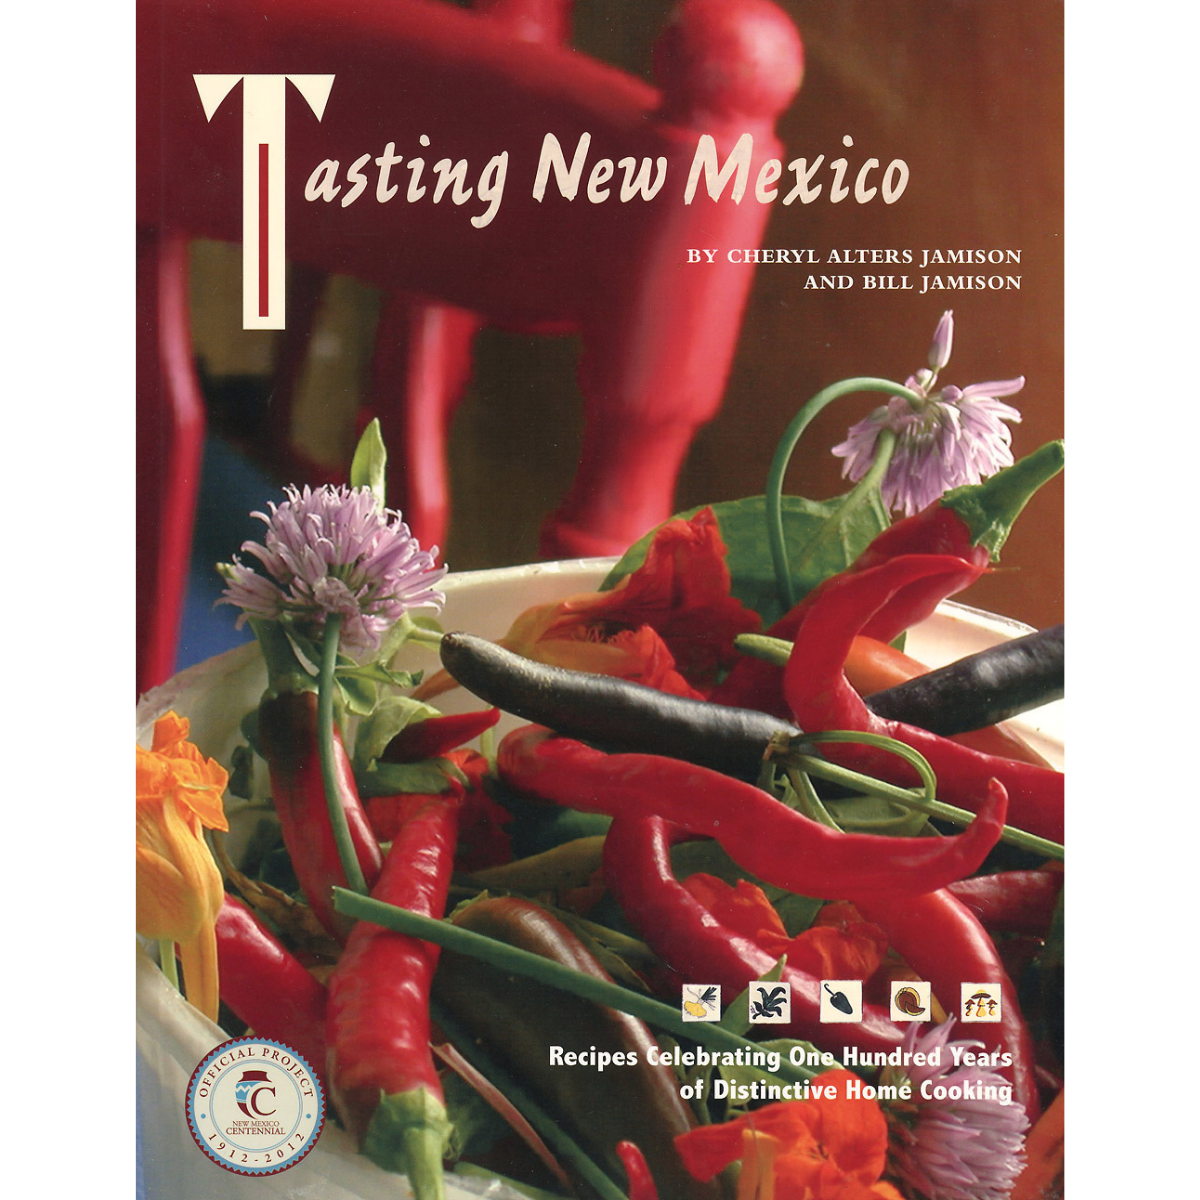 Tasting New Mexico: Recipes Celebrating 100 Years of Distinctive Home Cooking